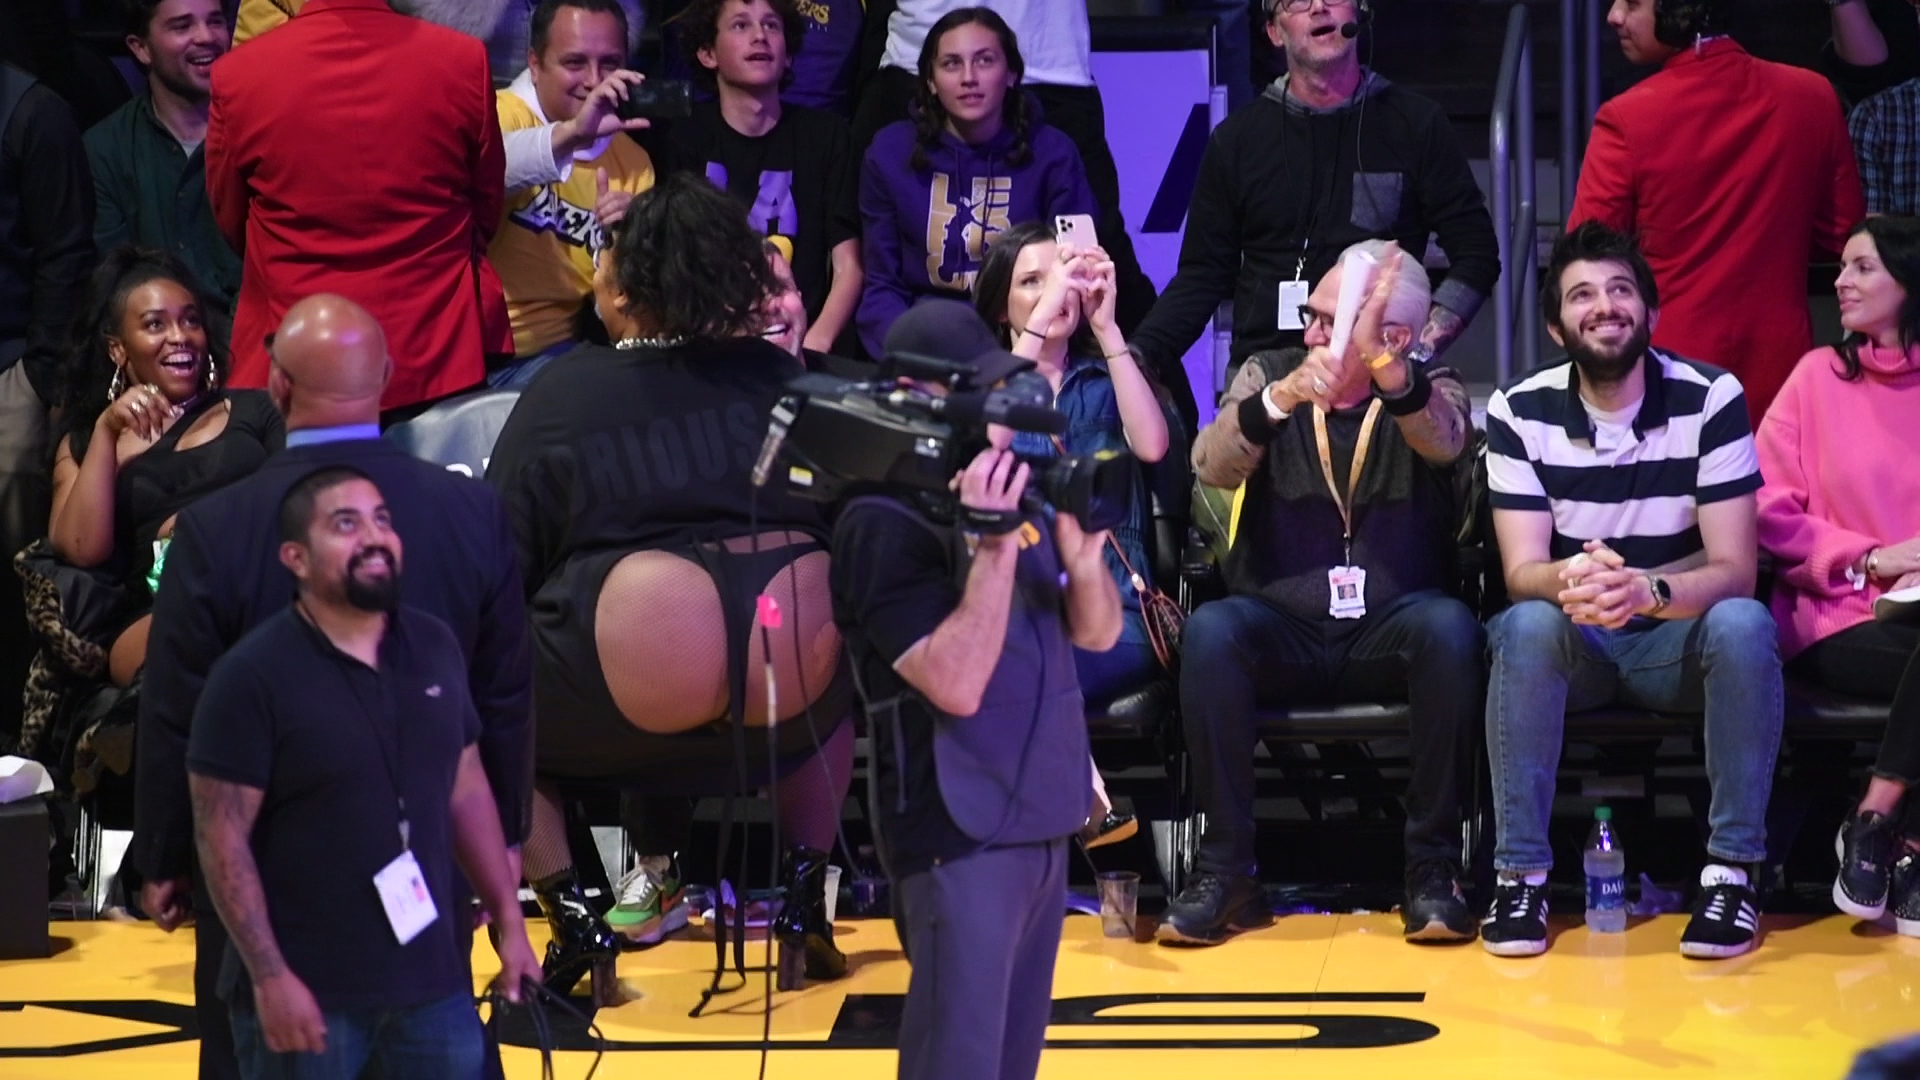 The Internet Reacts To Lizzo's Bare Butt Cheeks At A Laker's Game